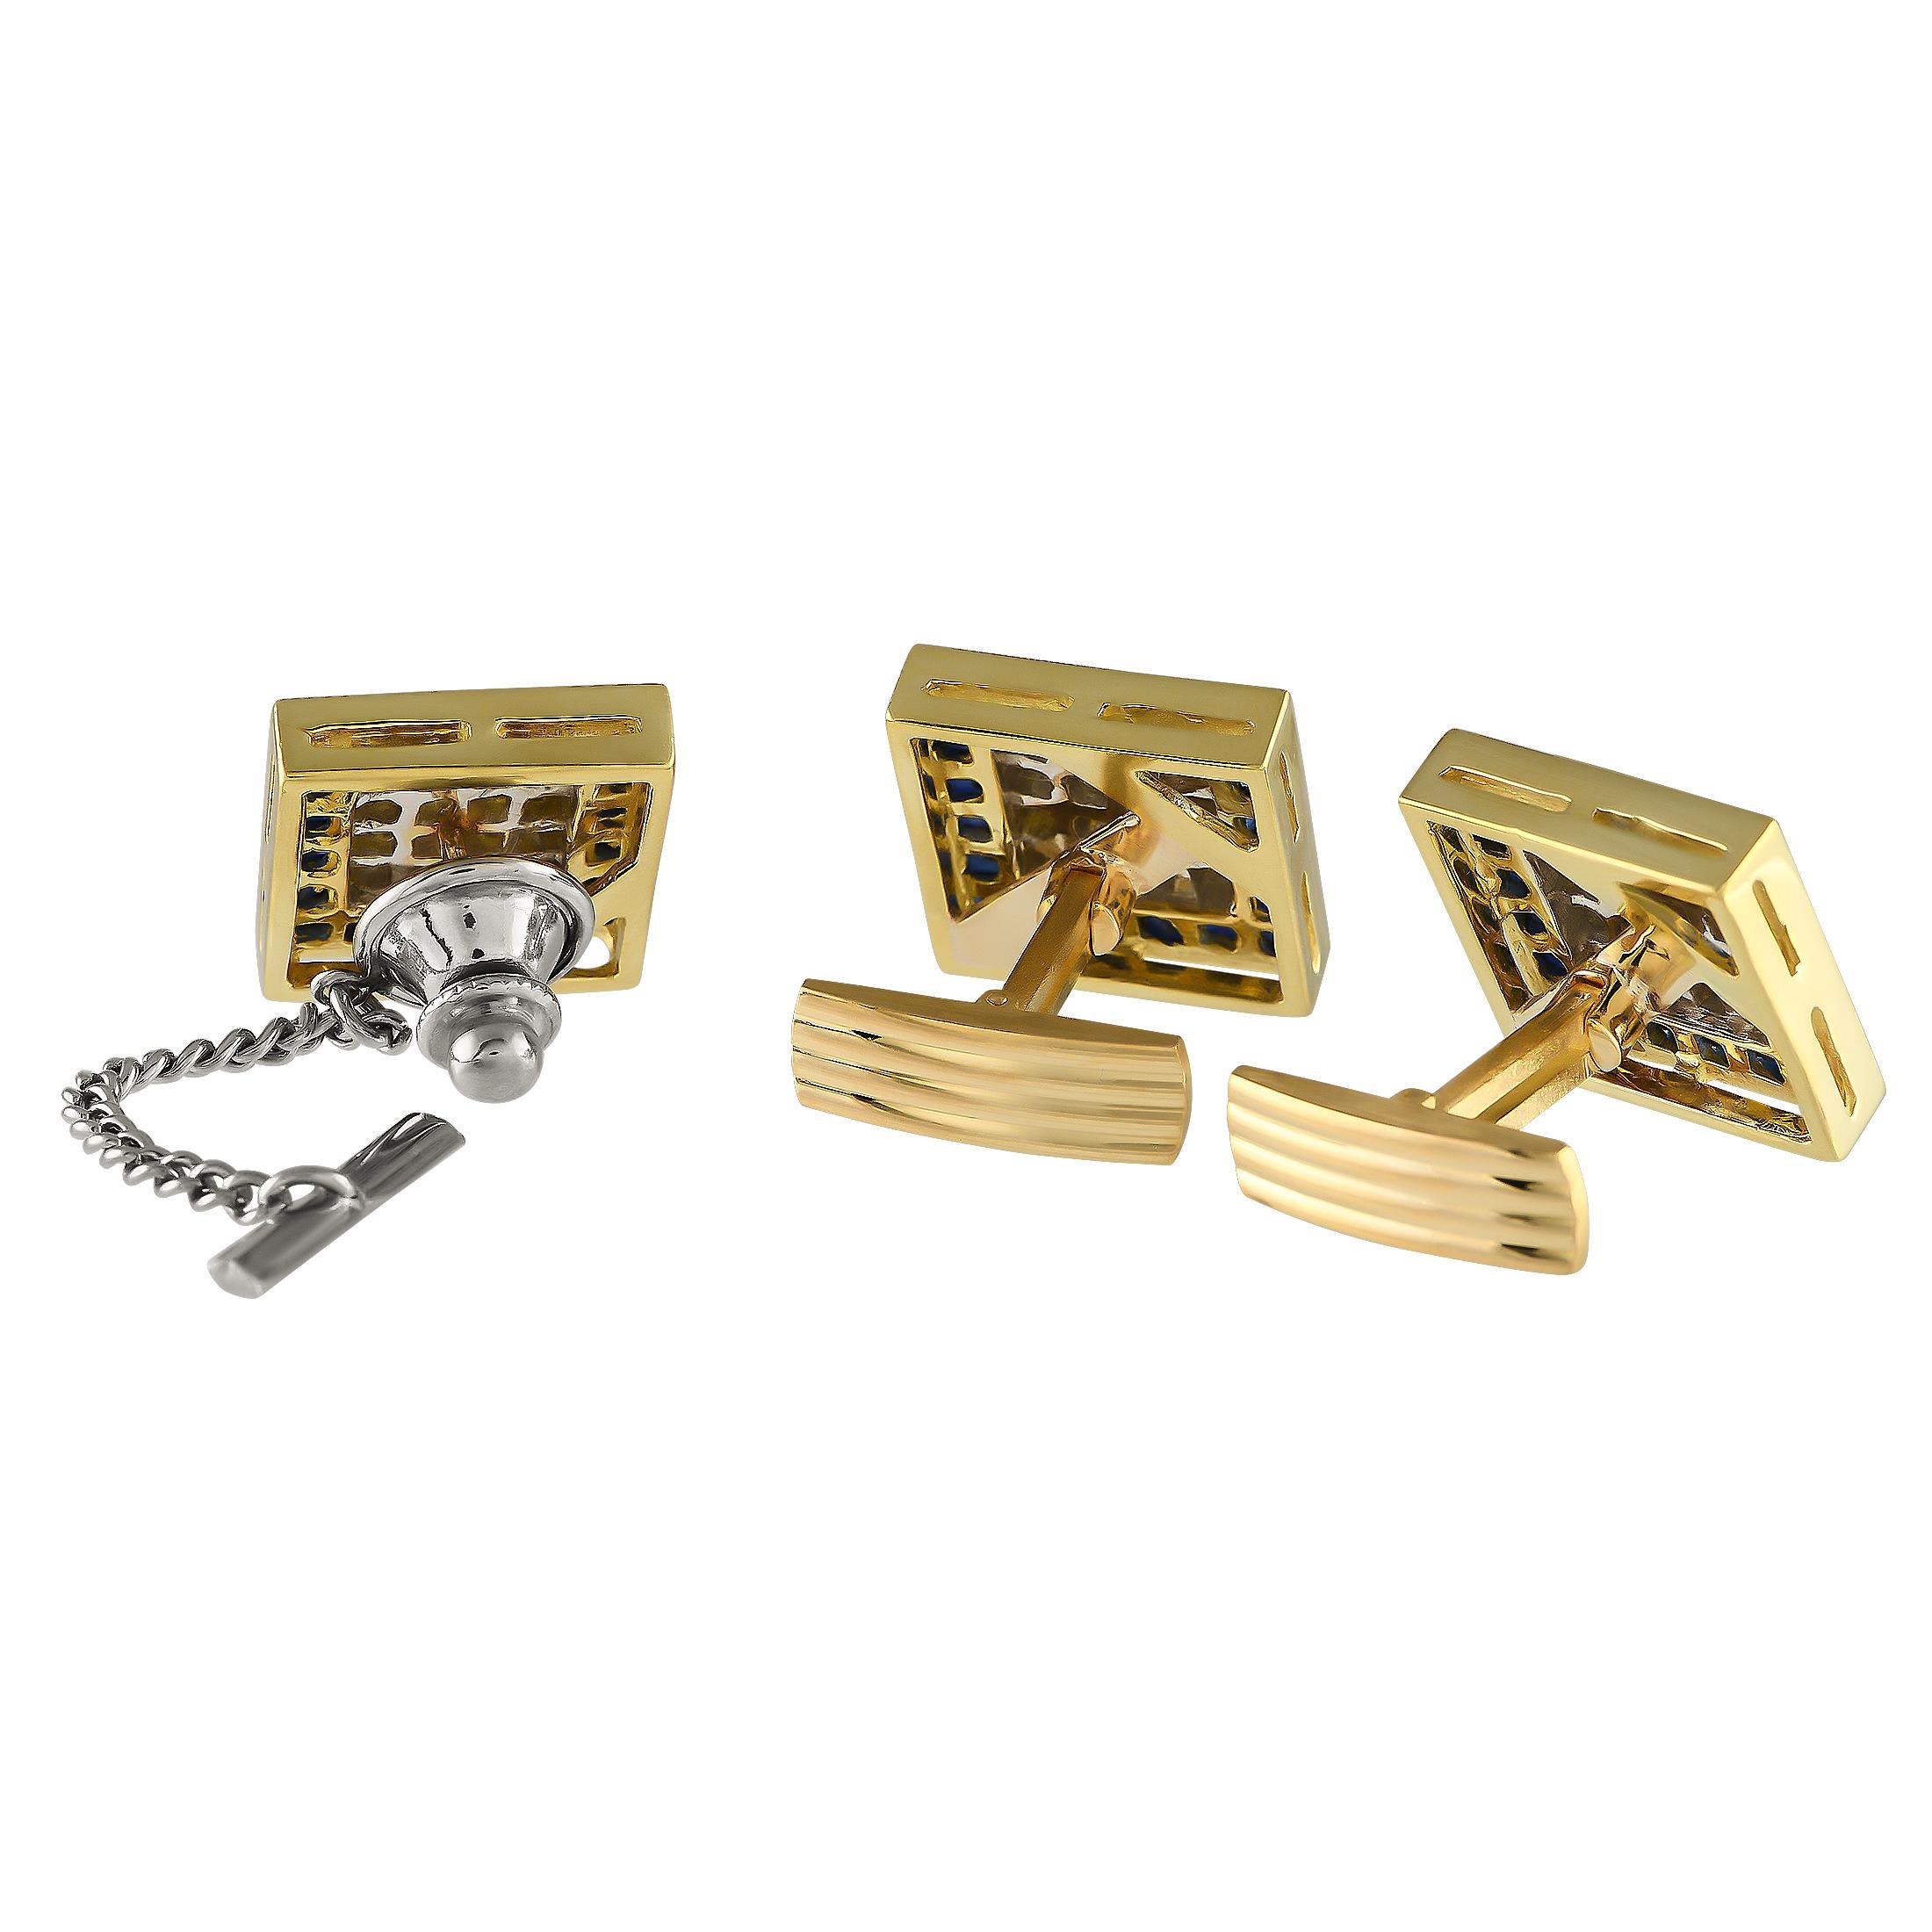 Give your man's formal wear an exceptionally luxurious finish with this cufflinks and tie tag set. The cufflinks and tie tag or tie clip are crafted in 18K yellow gold. They bear a square shape with a cluster of diamonds at the center, surrounded by